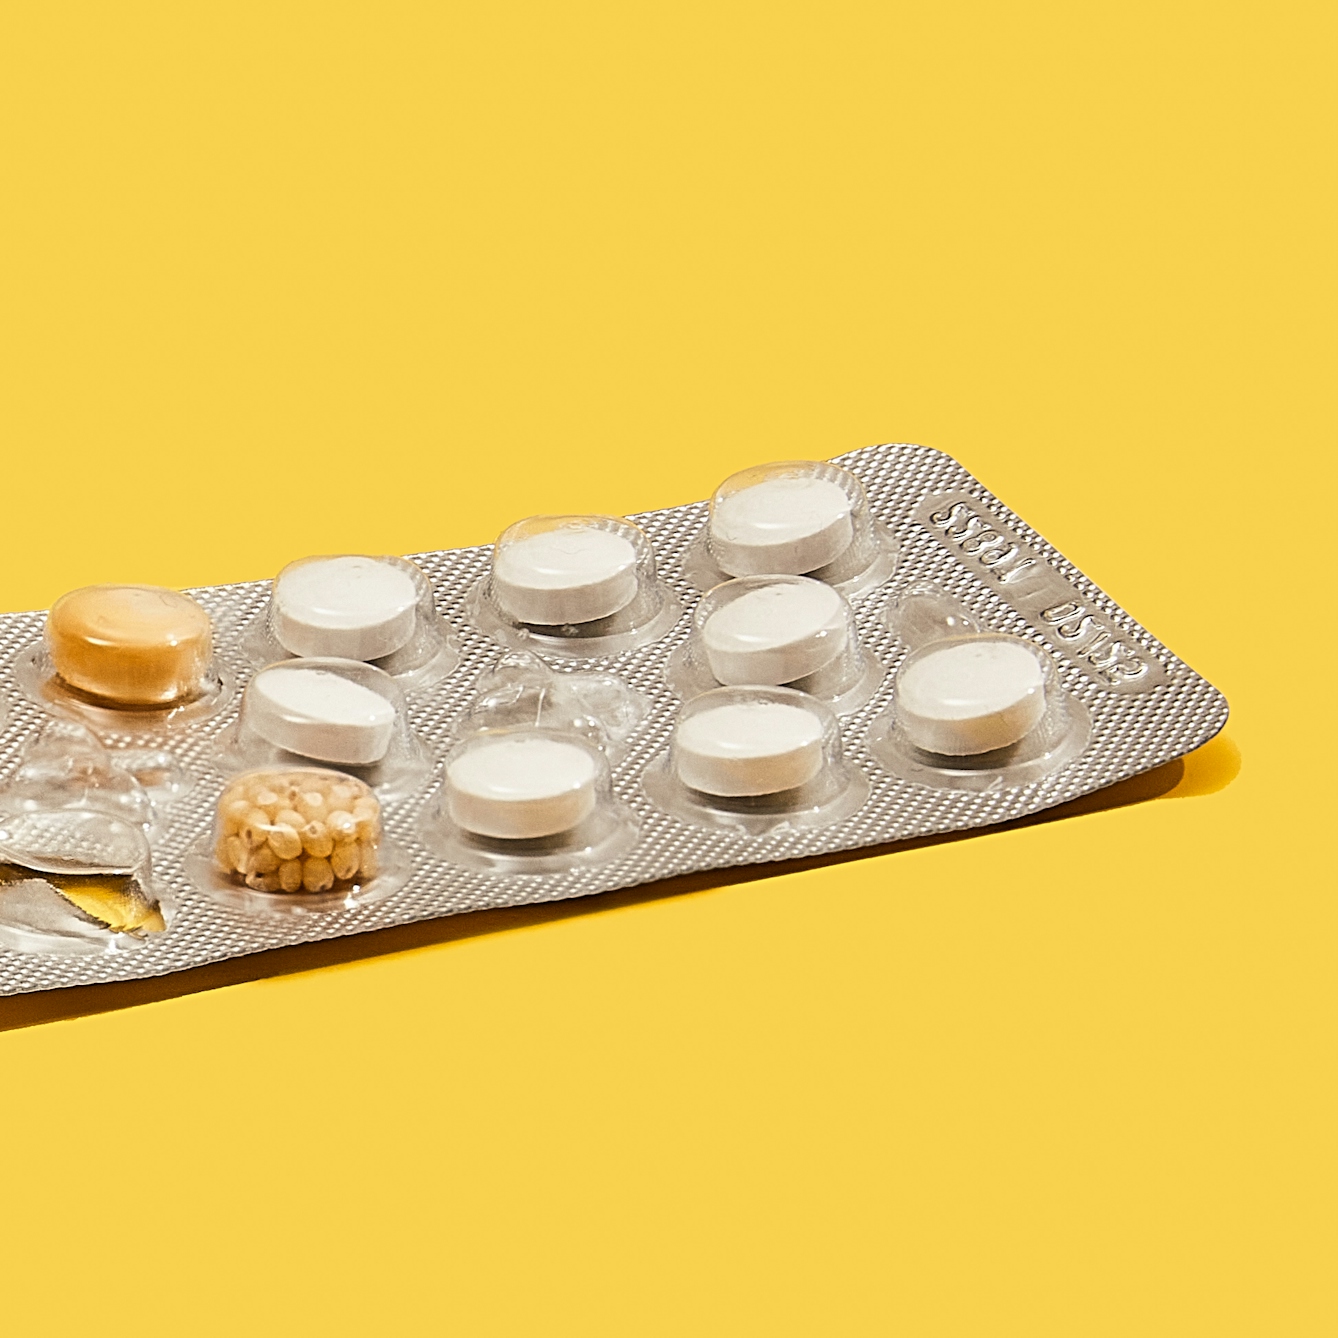 Photograph of a foil medicine pill blister pack sitting on a bright yellow background. The blisters on the right side of the pack contain white tabloid pills. The blisters on the left of the pack contain a single kernel of corn or a collection of small grains of maize.